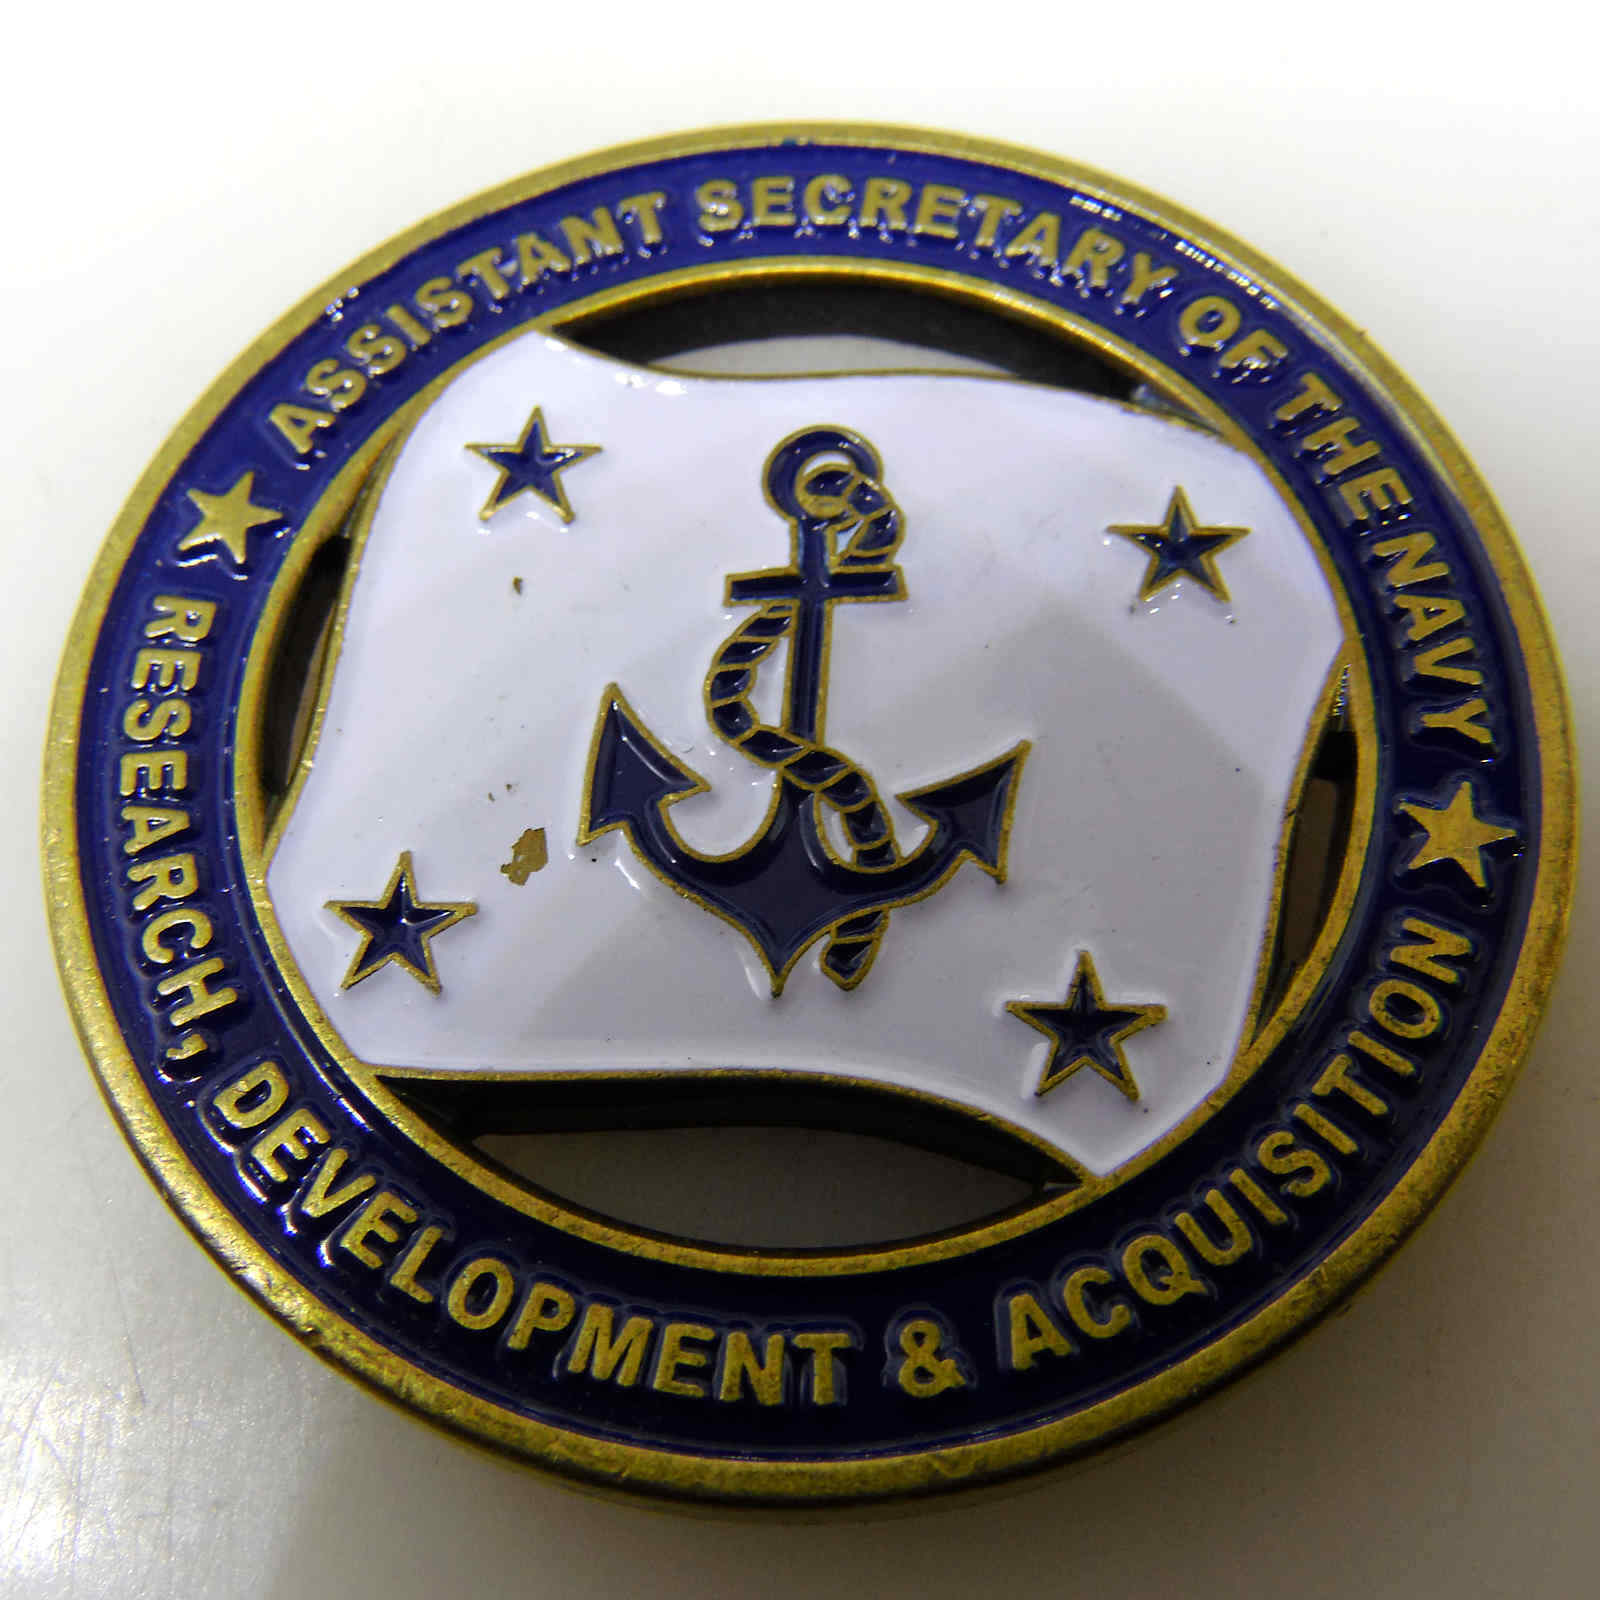 USMC USN ASSISTANT SECRETARY OF THE NAVY CHALLENGE COIN